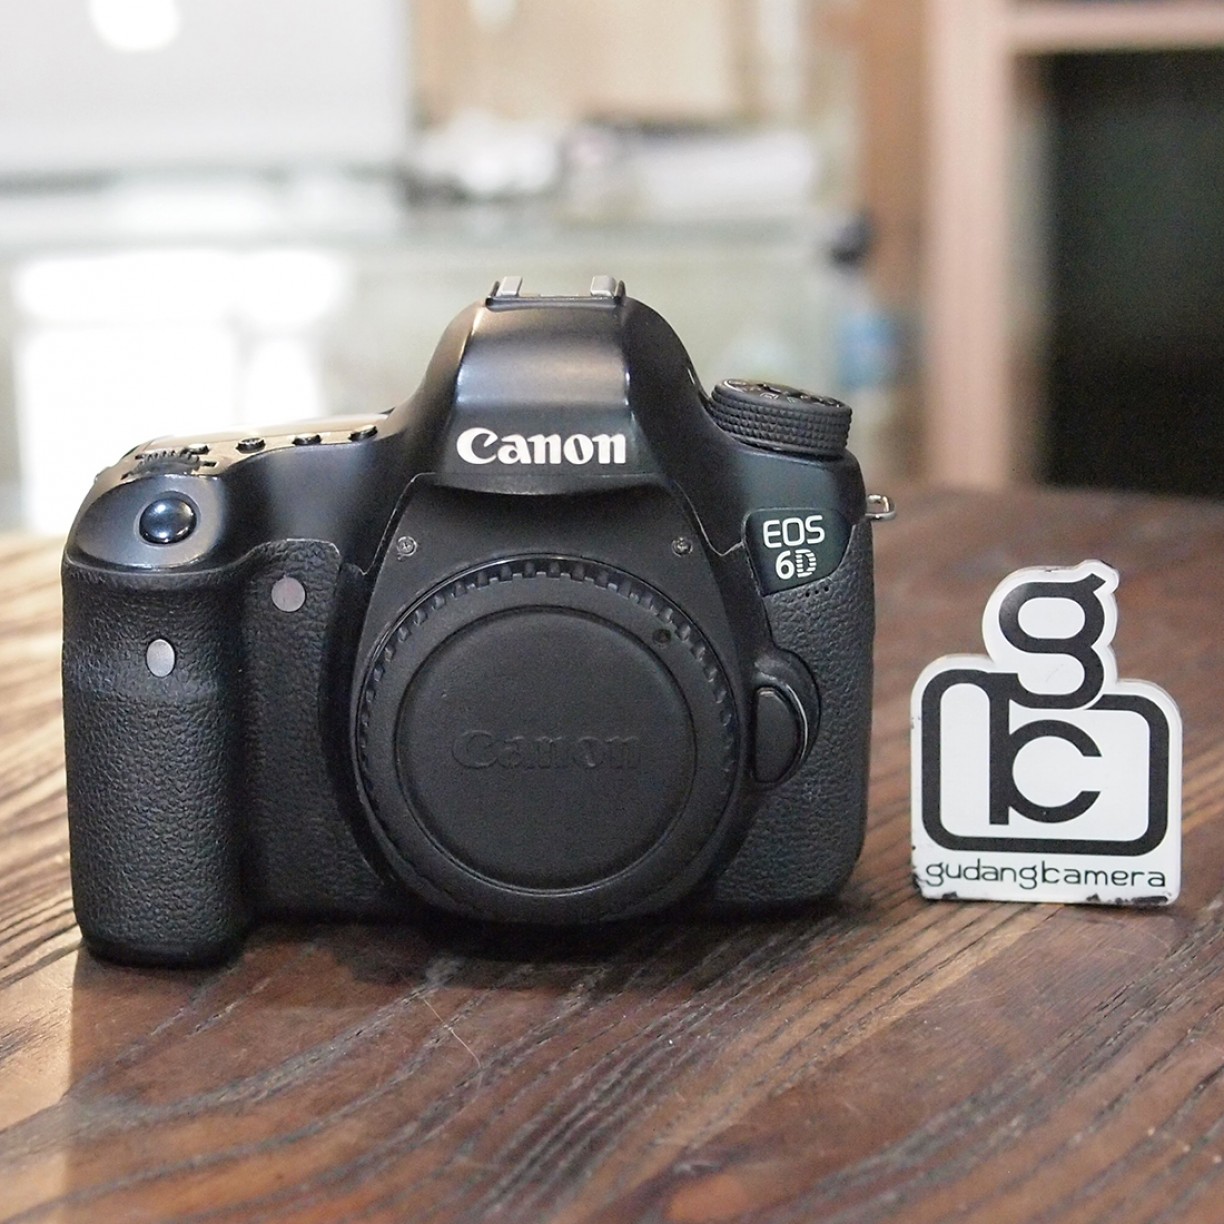 CANON EOS 6D BODY ONLY - GOOD CONDITION - 0450